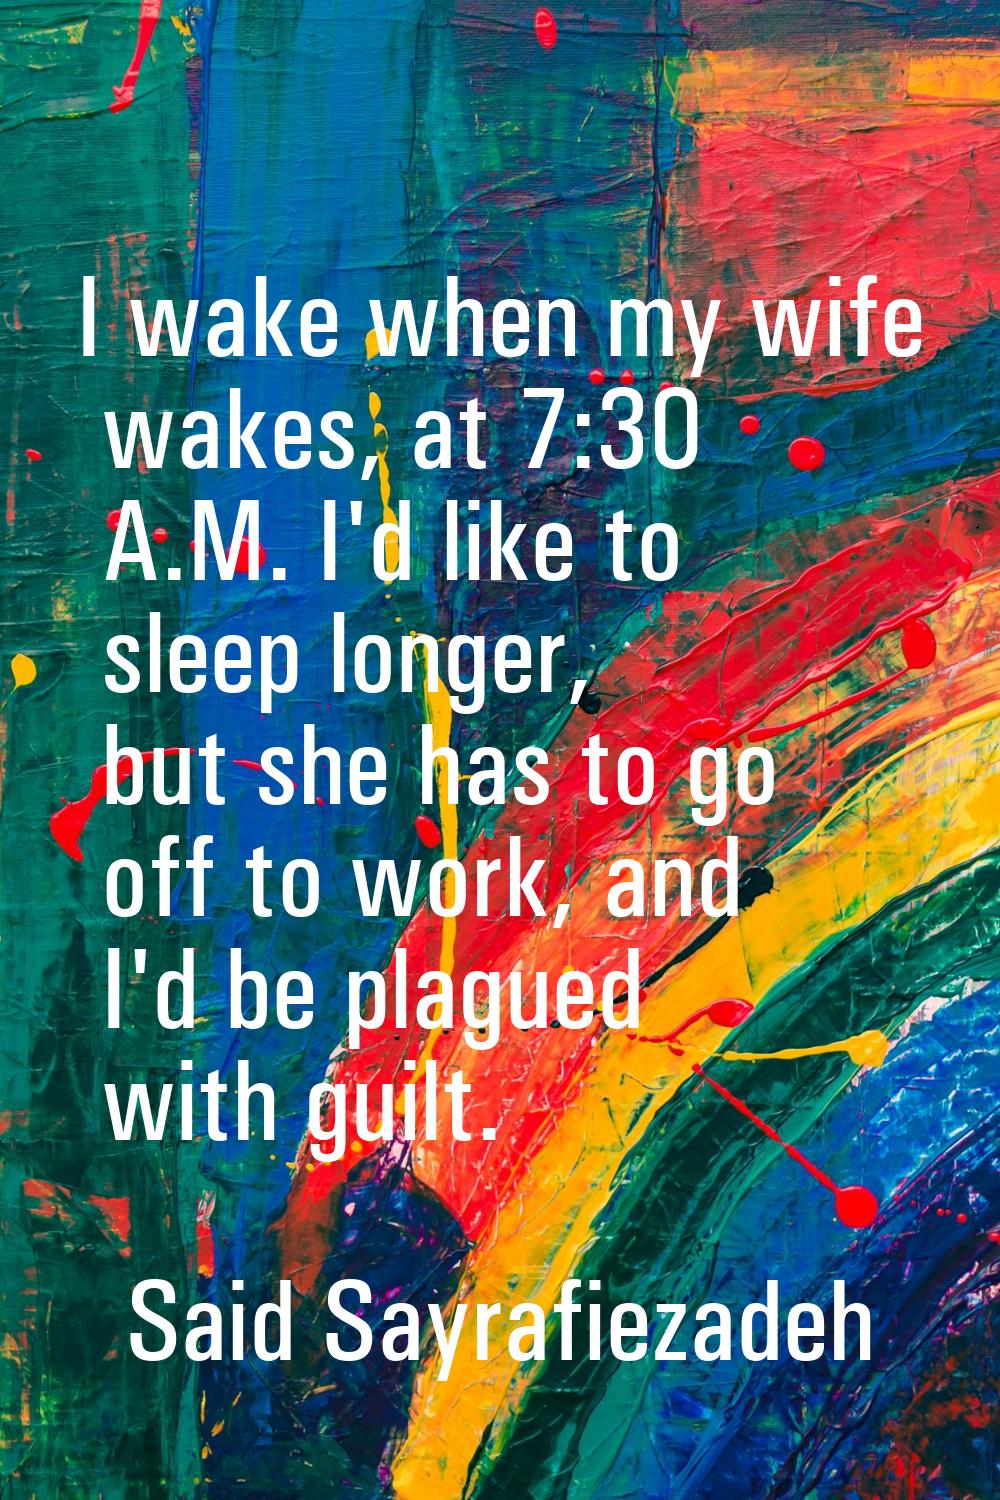 I wake when my wife wakes, at 7:30 A.M. I'd like to sleep longer, but she has to go off to work, an